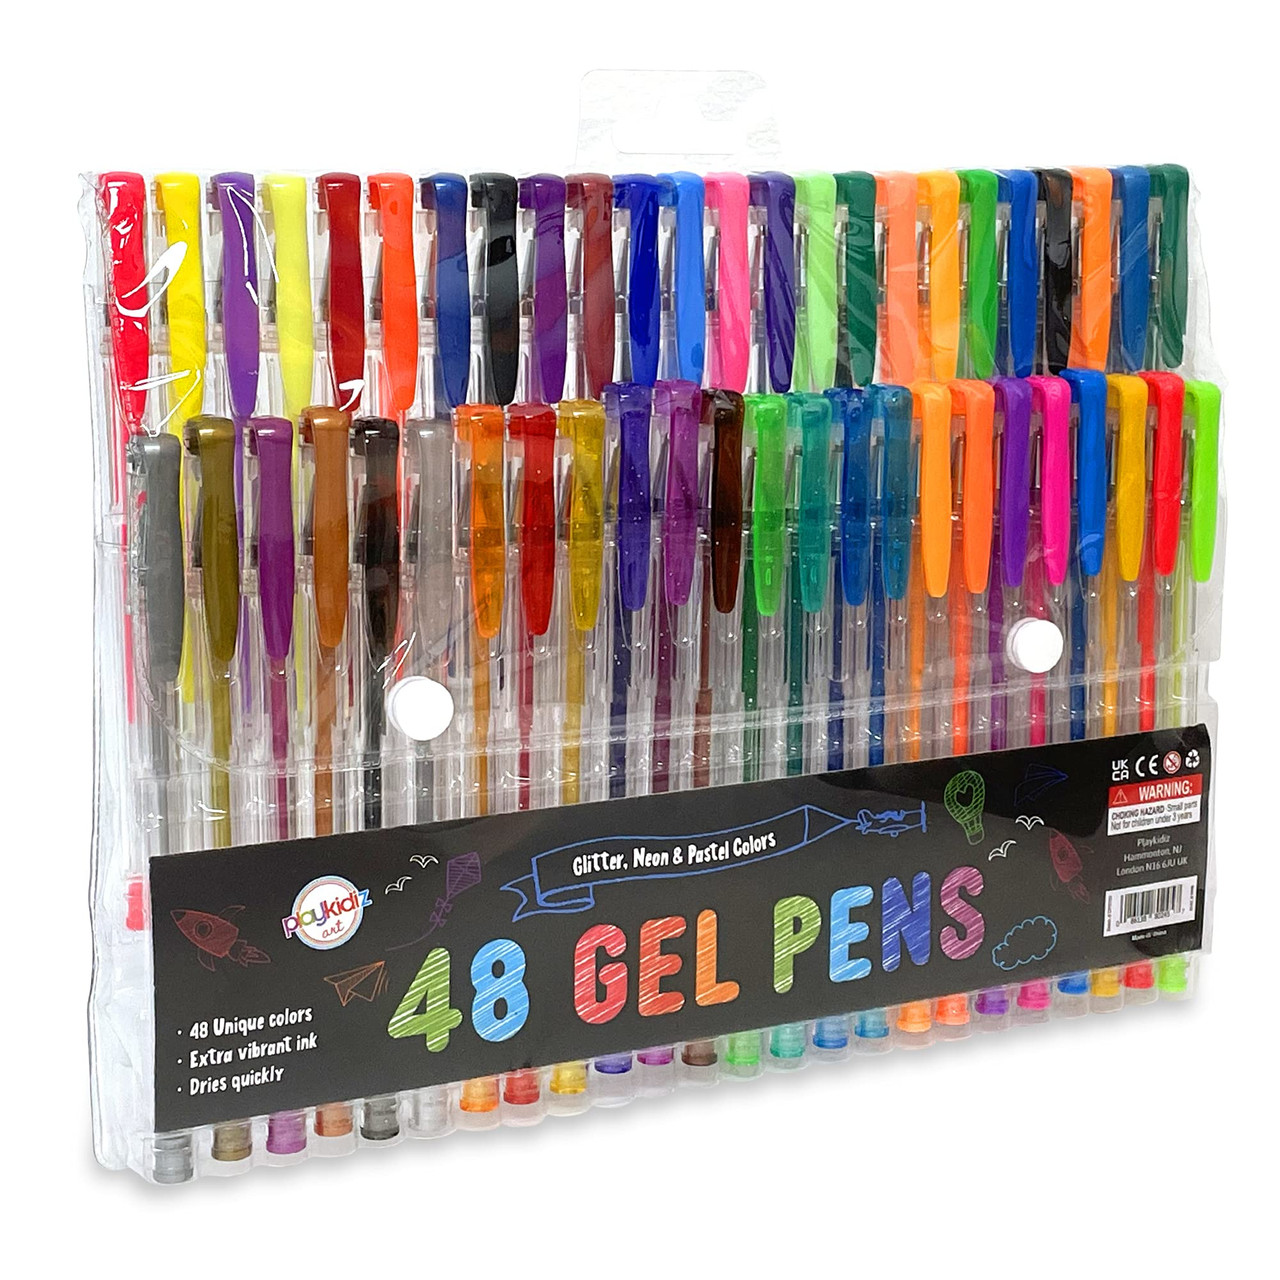 Playkidz Gel Pens, Fine Point Colored Pens Great for Adult Coloring Book,  Classic Vibrant Colors 10 Pack, Journaling, Crafting, Doodling, Drawing Fun